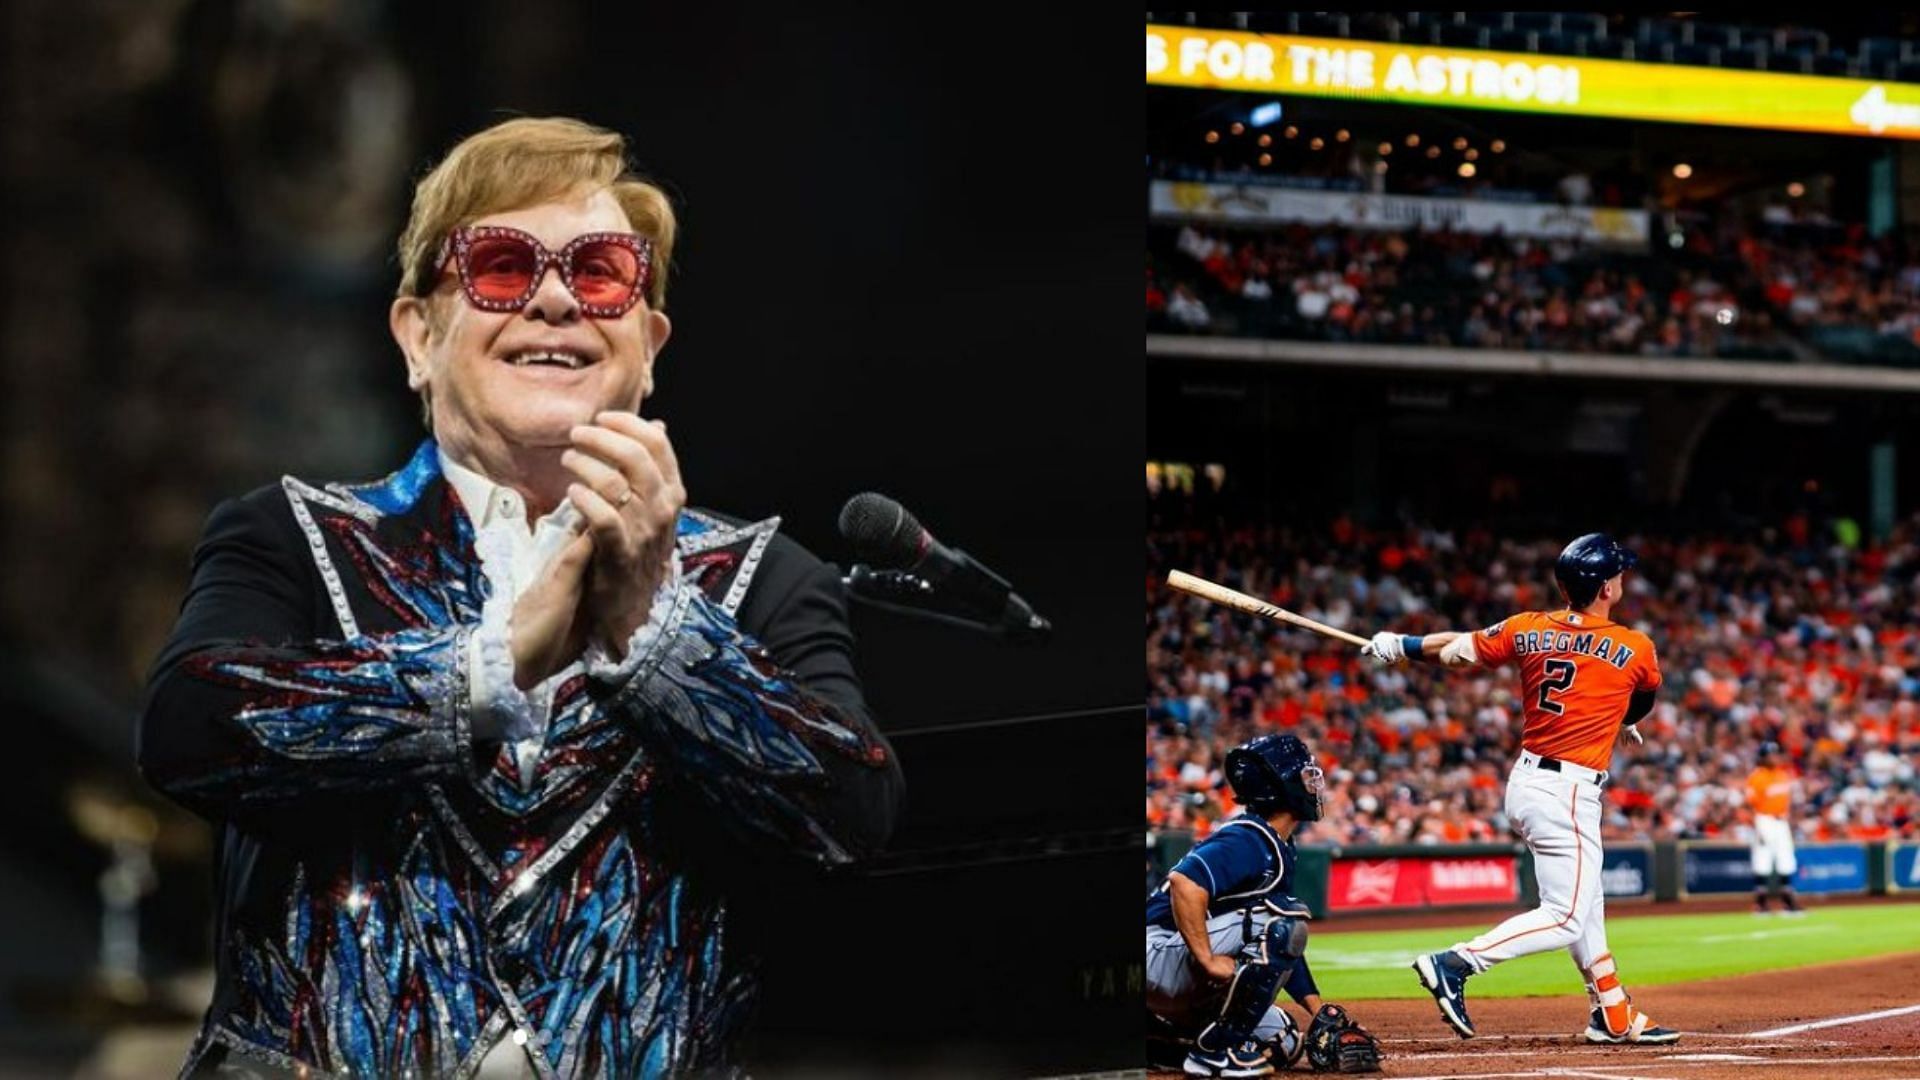 MLB Twitter divided after legendary singer Elton John cancels Minute Maid  Park concert in November with Houston Astros advancing in playoffs